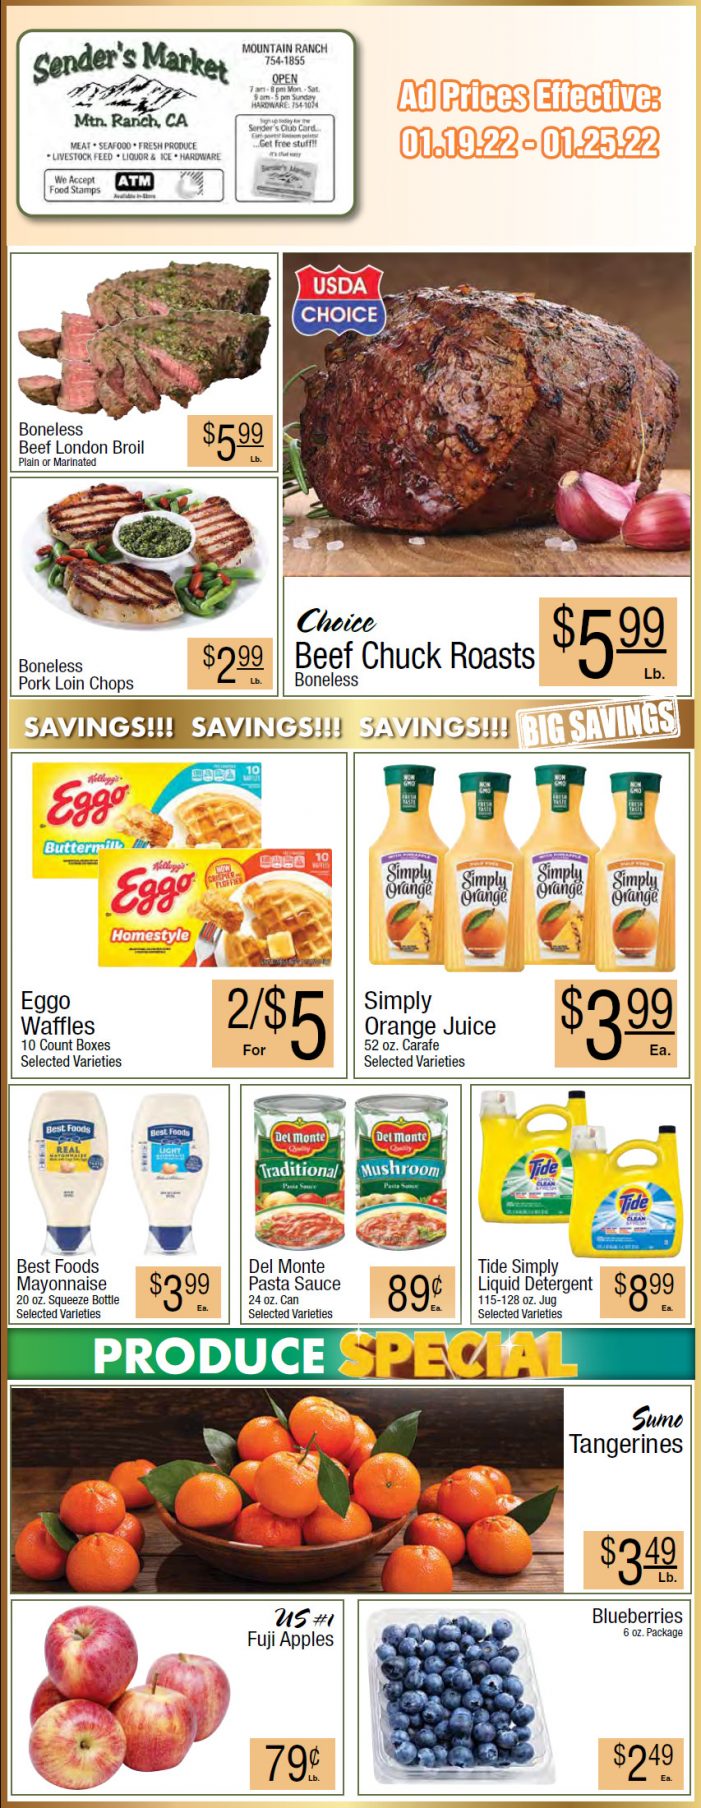 Sender’s Market’s Weekly Ad & Grocery Specials Through January 25th Shop Local & Save!